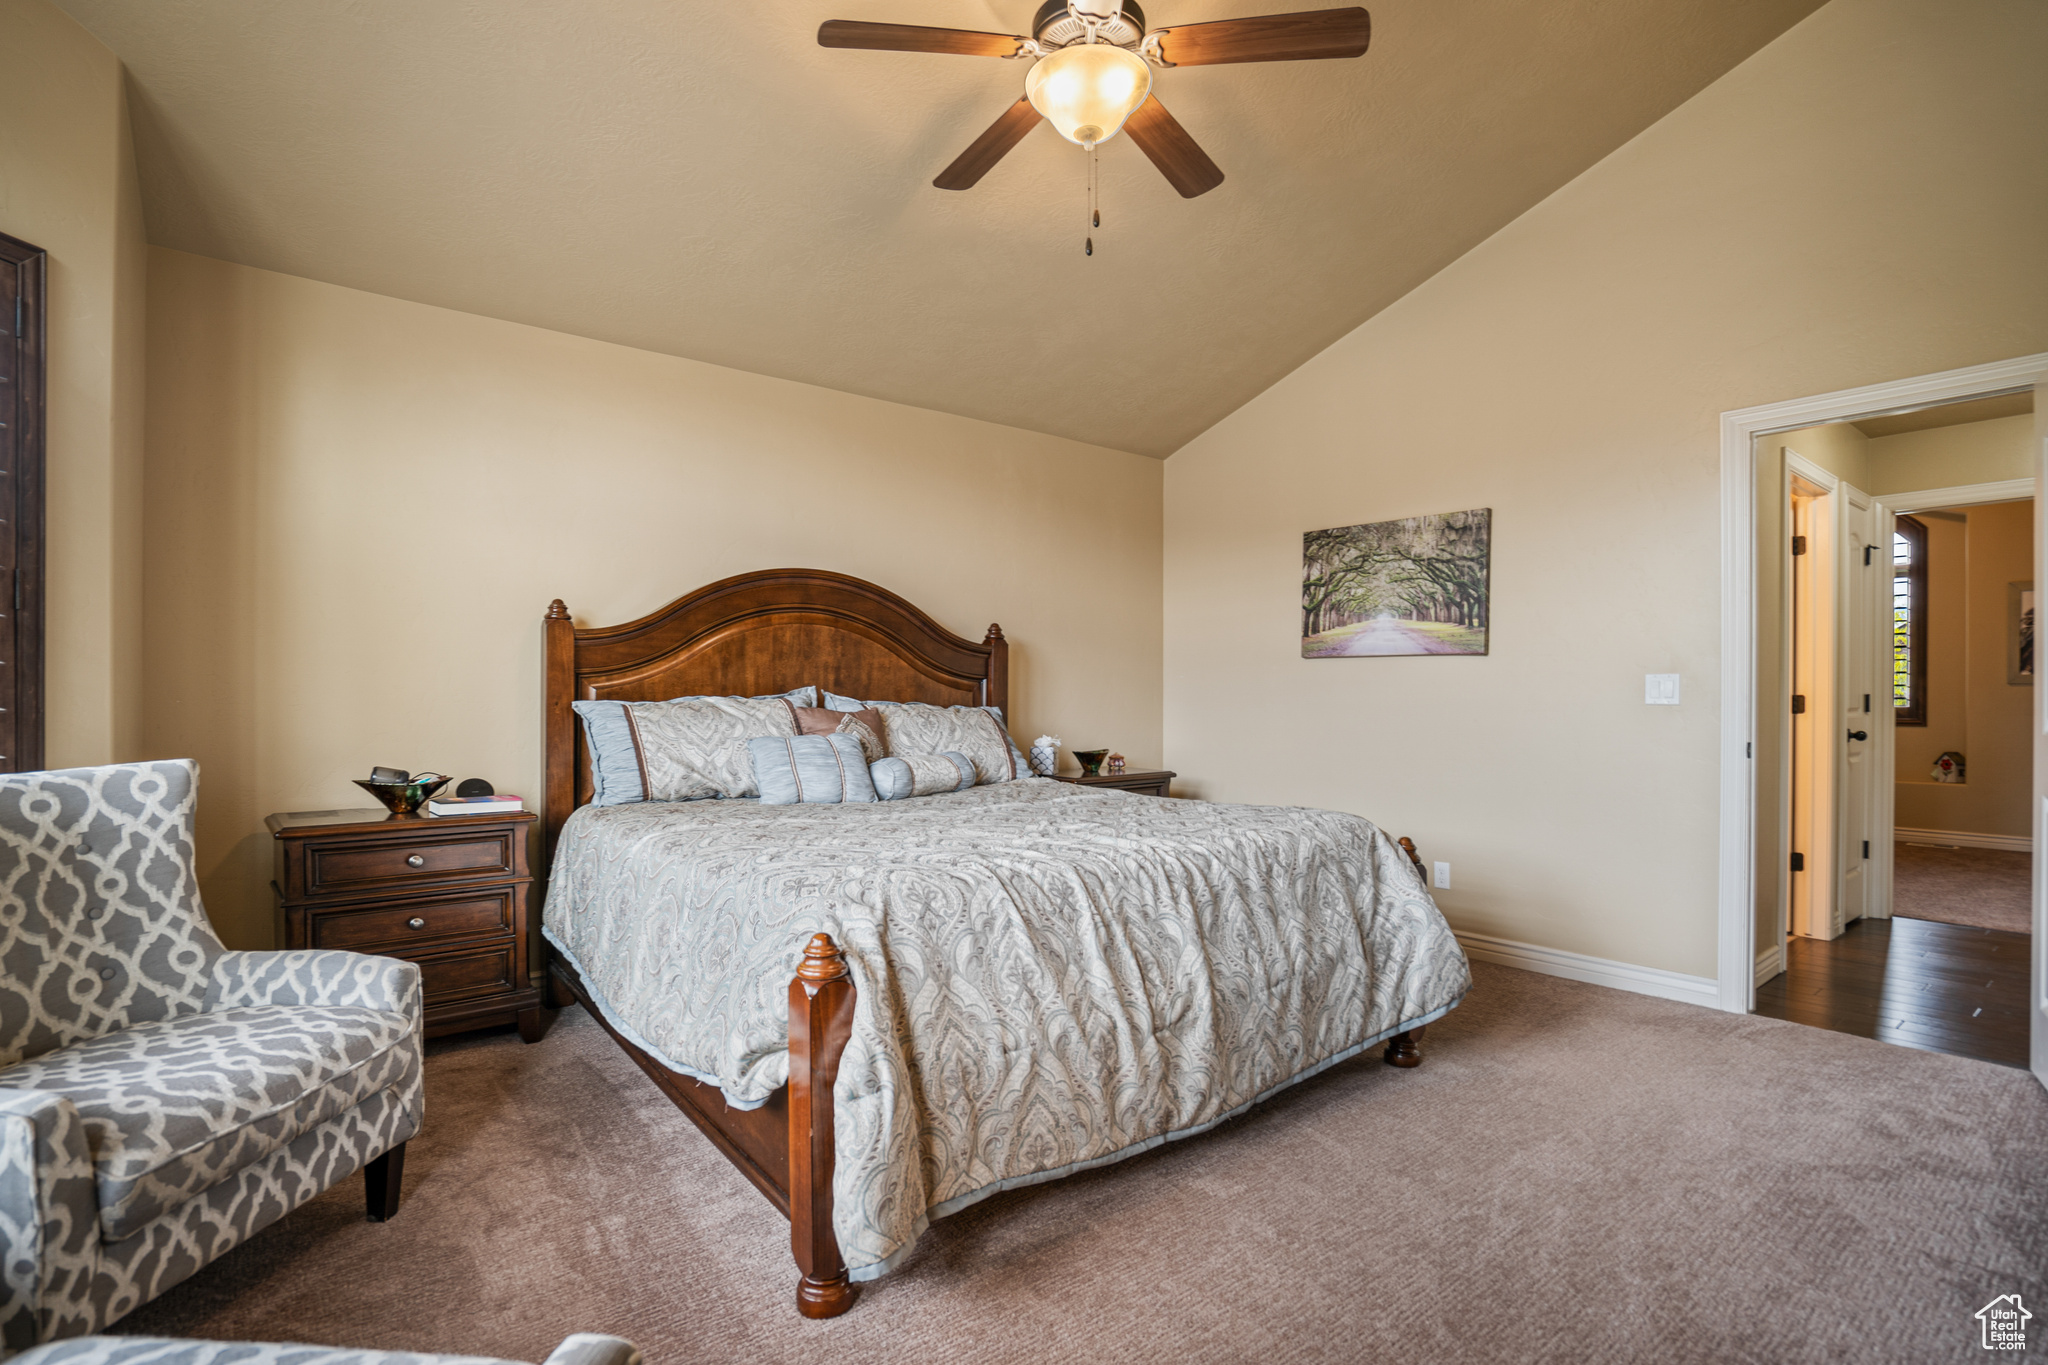 Bedroom featuring ceiling fan, high vaulted ceiling, and dark carpet